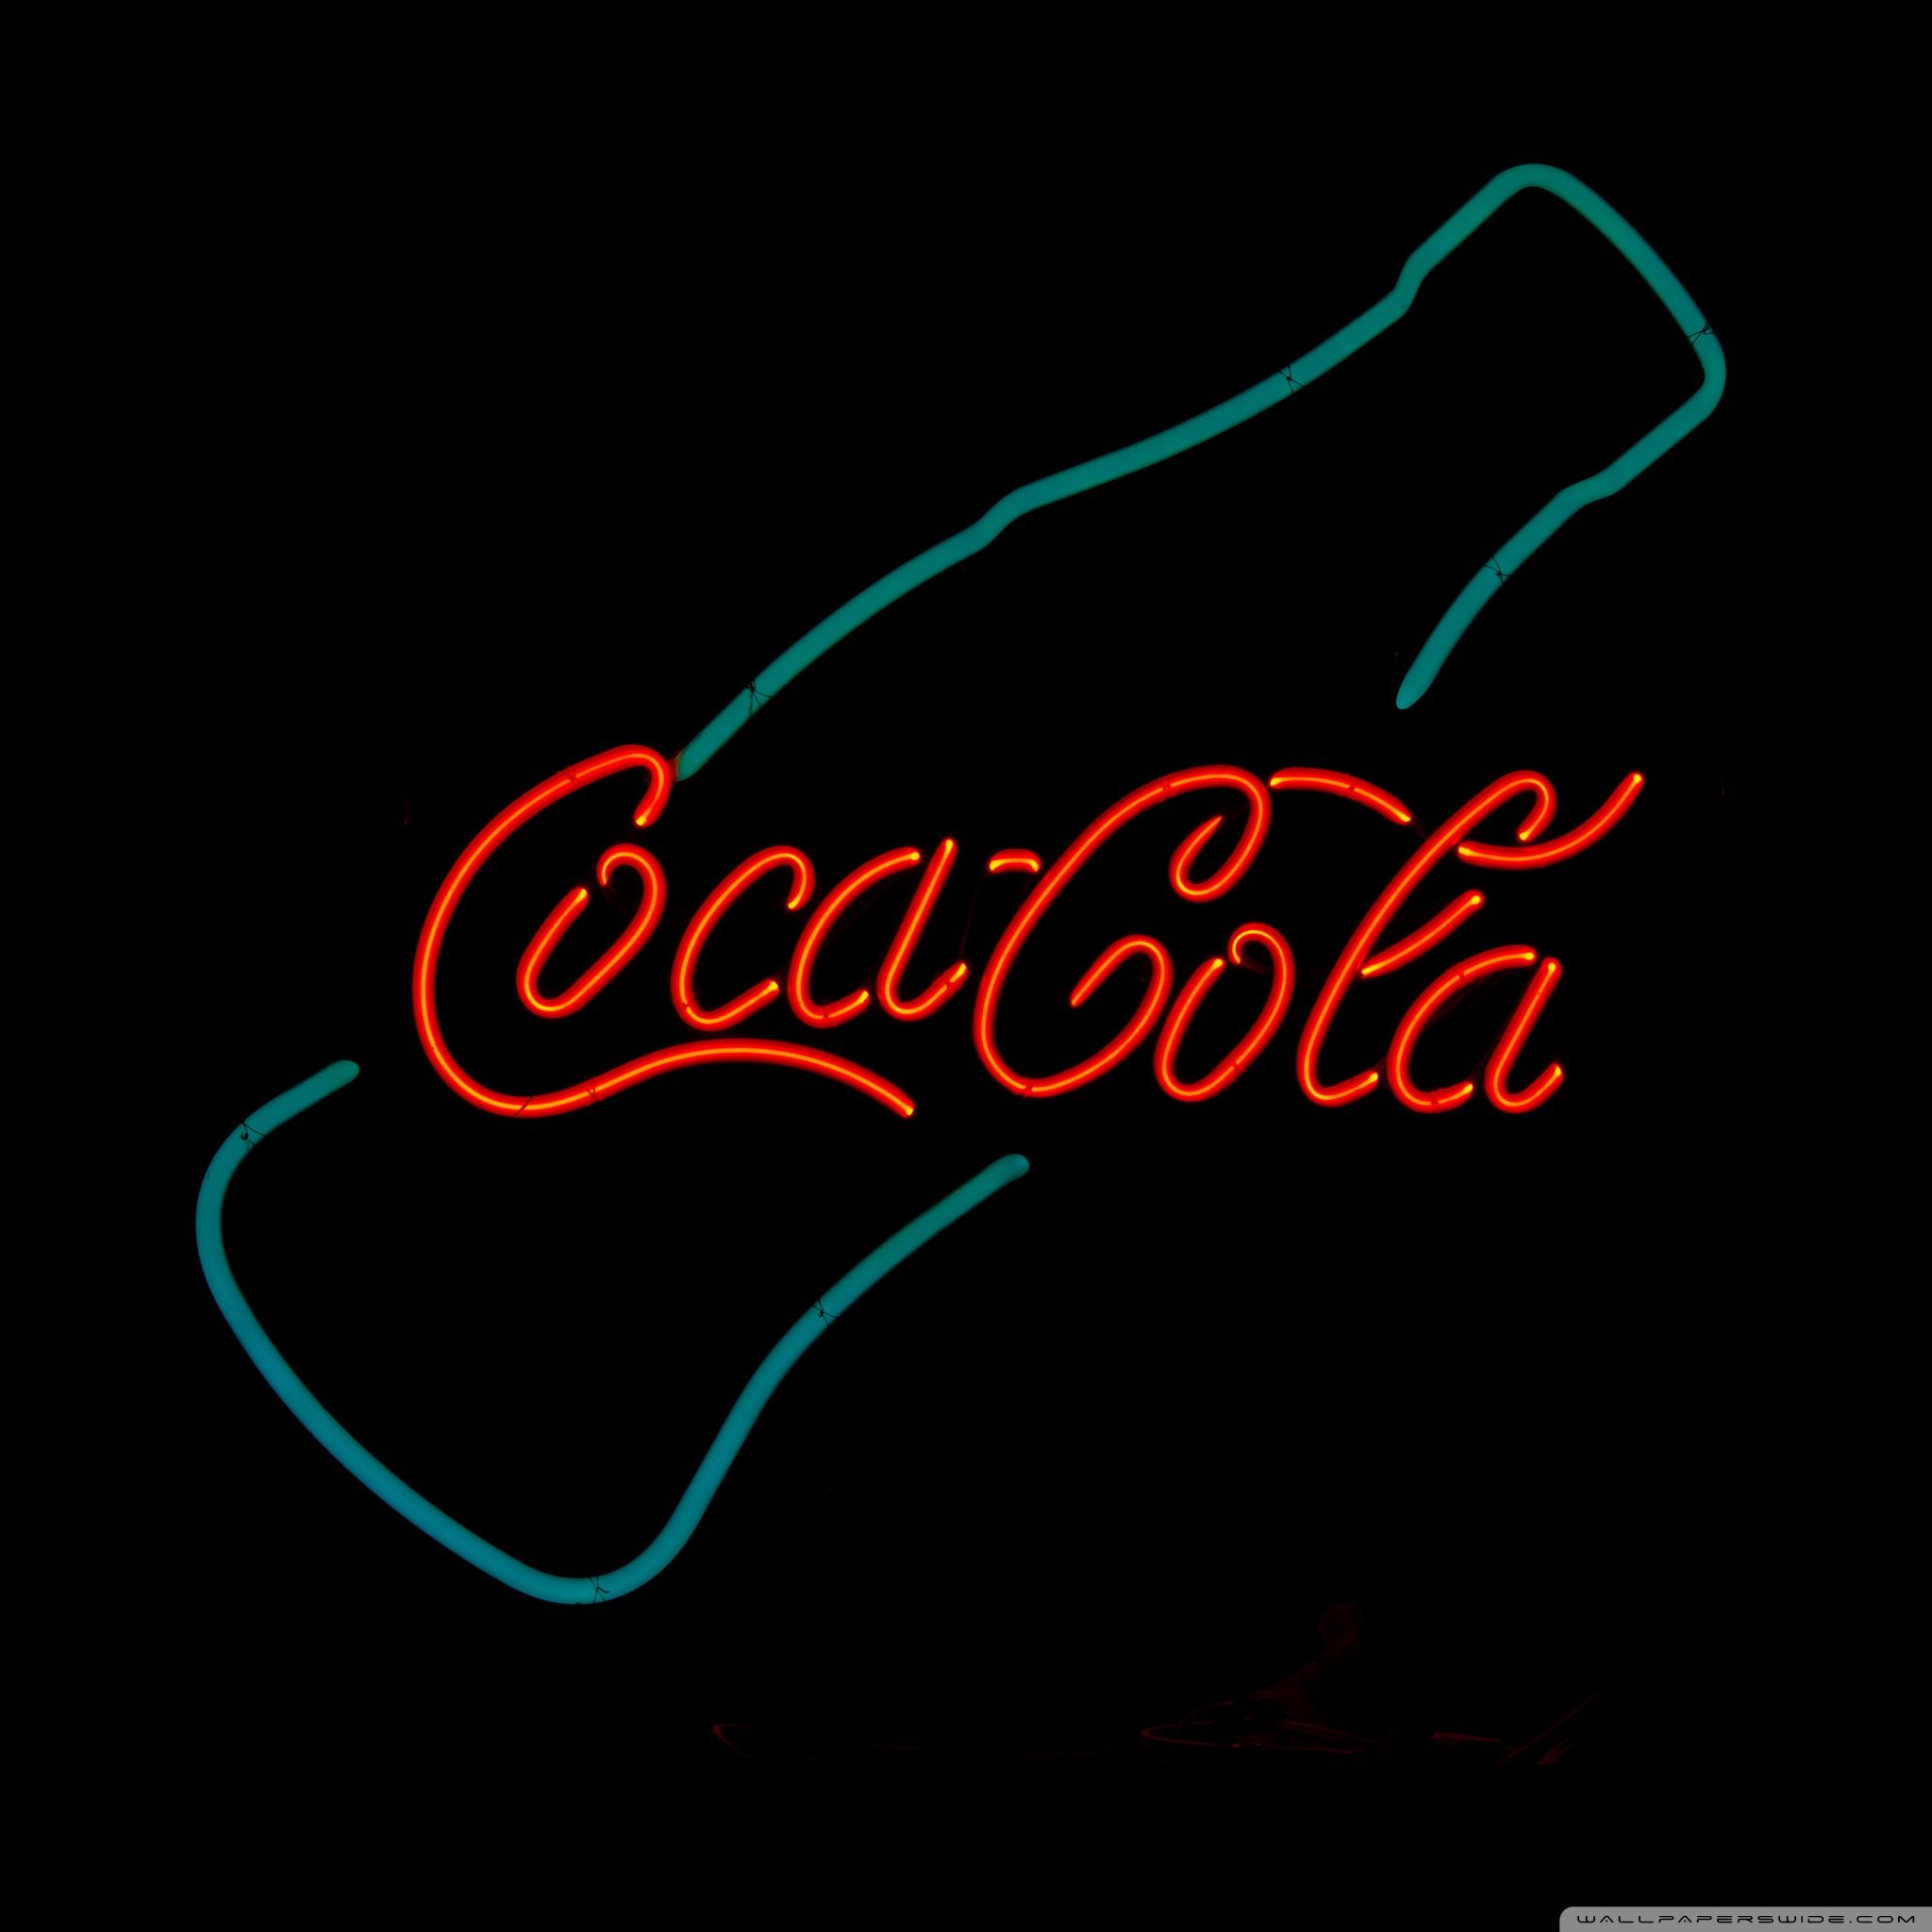 A neon sign that says coca cola - Texas